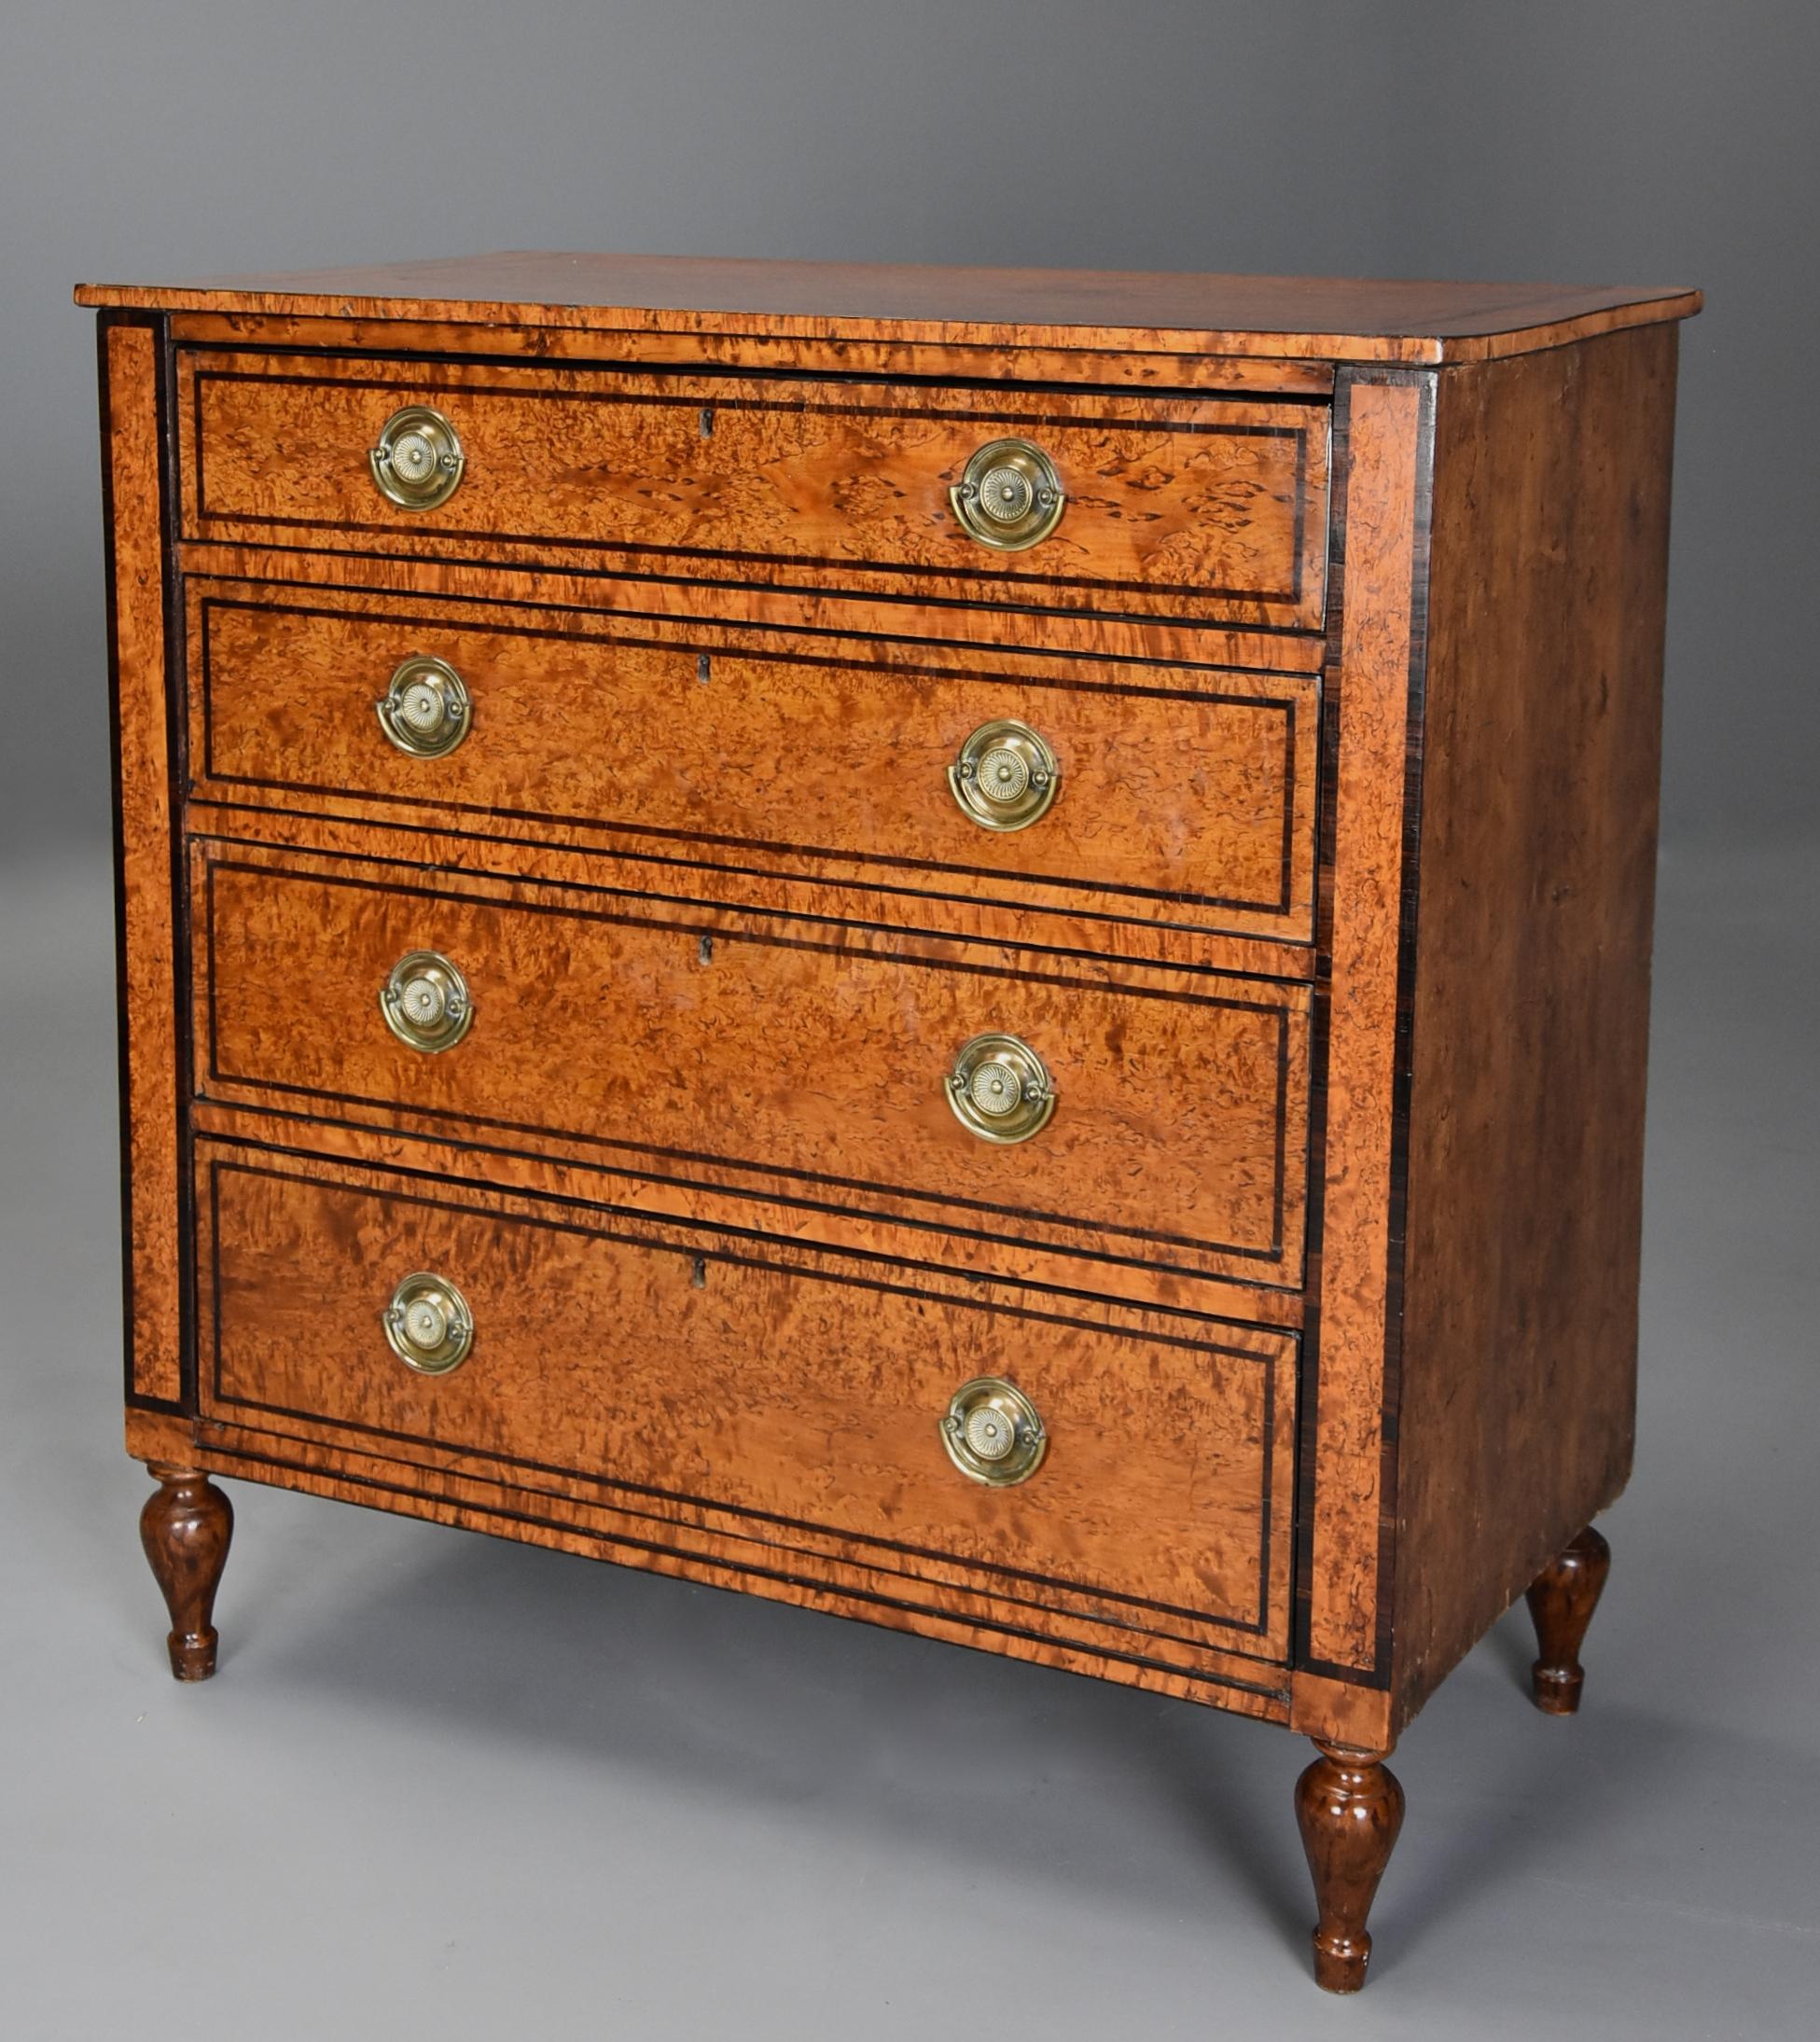 An extremely rare early 19th century Regency (circa 1820) period Karelian birch (or Masur birch) chest of drawers of good patina (color).

This chest of drawers consists of a Karelian birch veneered top with mahogany banding and outer birch cross